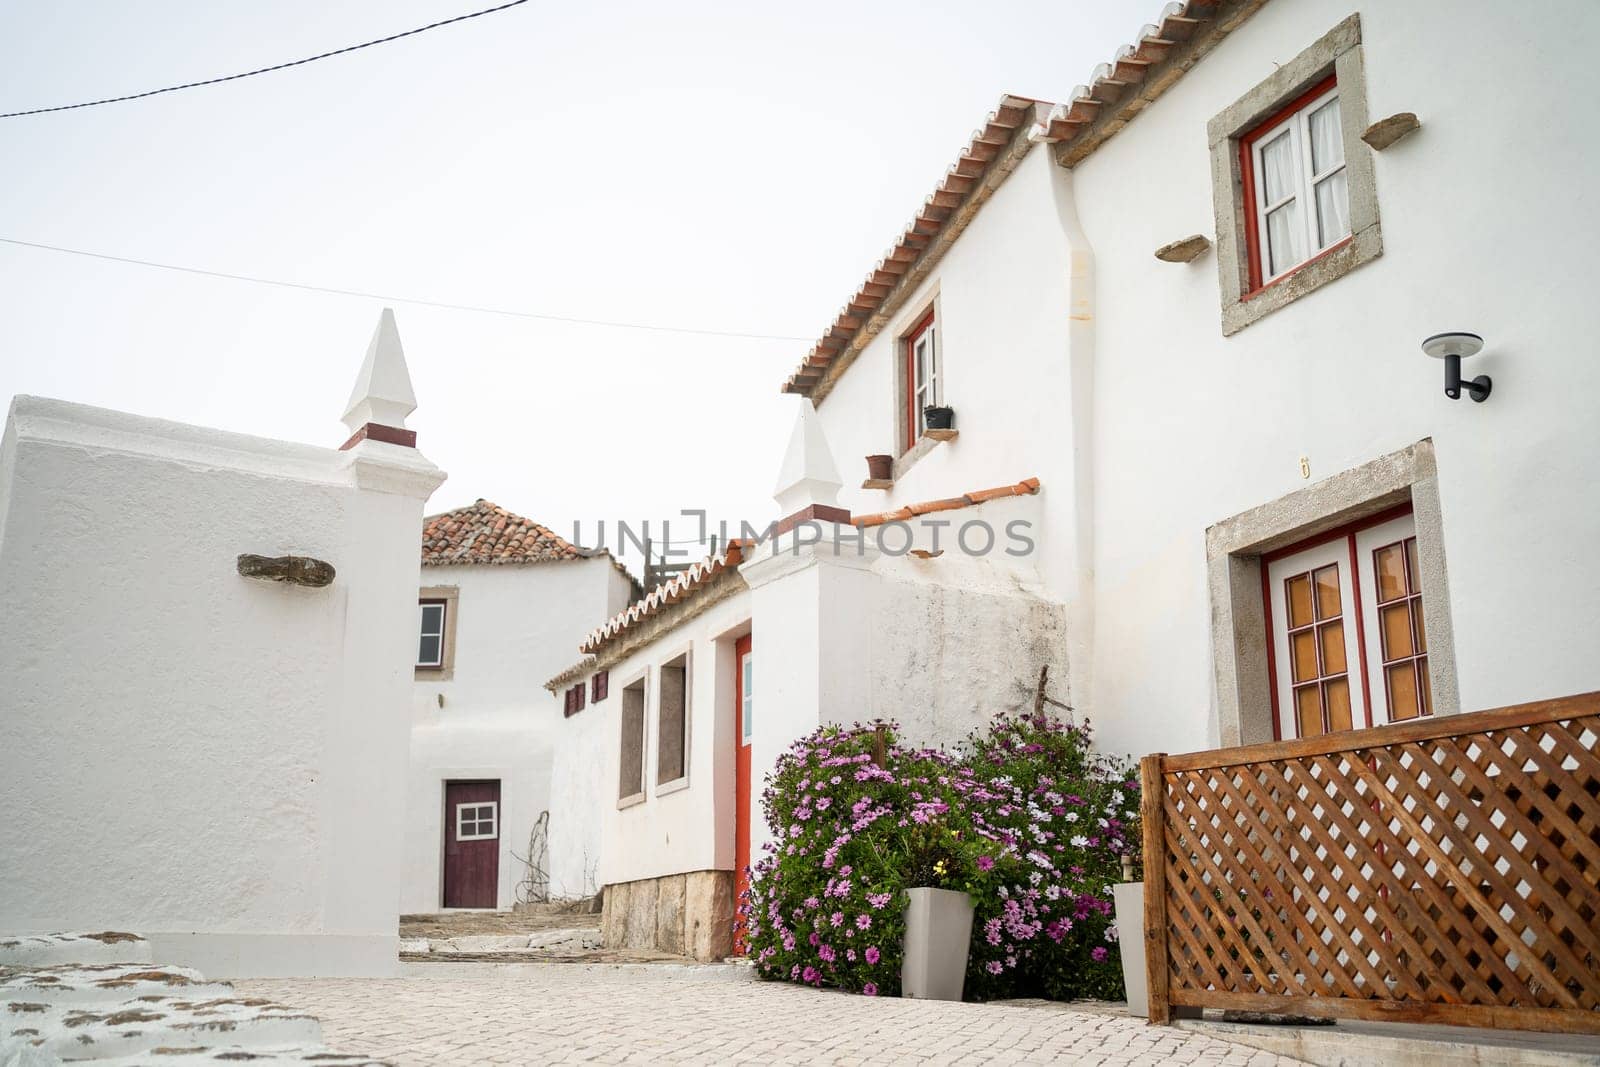 Small streets in Portugal surrounded by white two-storey houses by andreonegin